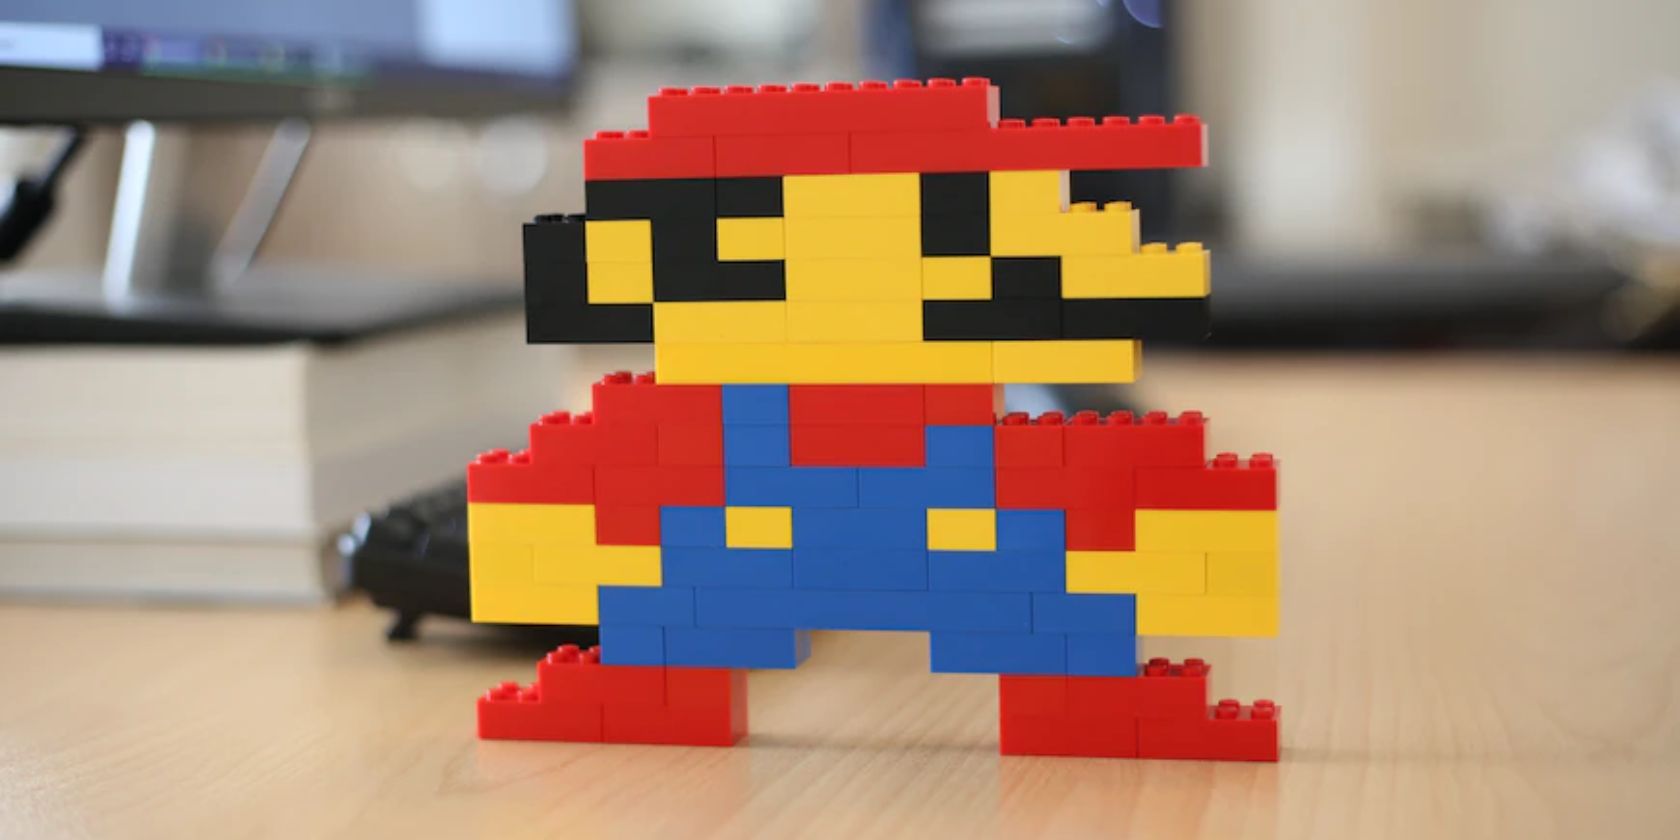 A blocky Mario figure standing on a table